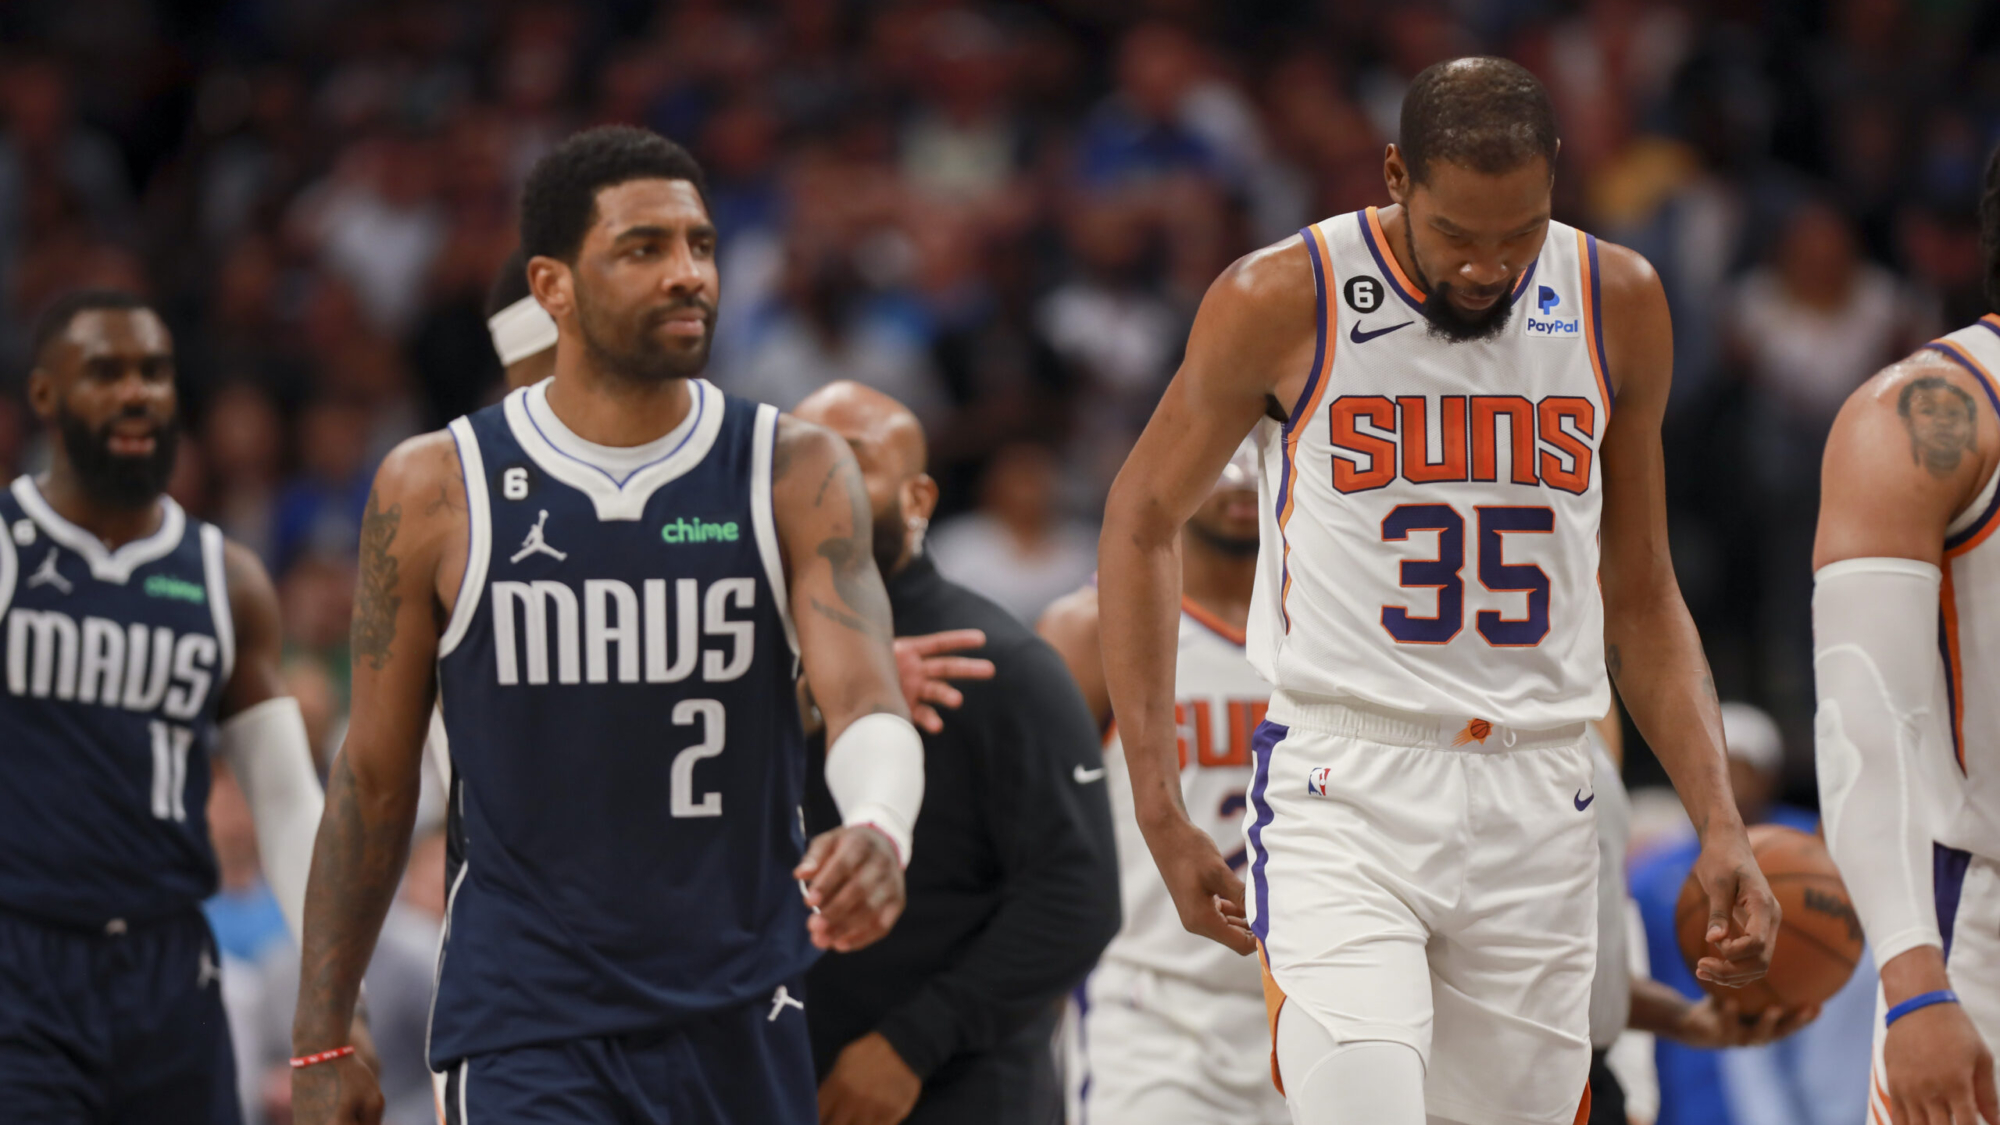 Dallas Mavericks guard Kyrie Irving (2) and Phoenix Suns forward Kevin Durant (35) walk down the court during the second half of an NBA basketball game, Sunday, March 5, 2023, in Dallas. (AP Photo/Gareth Patterson)